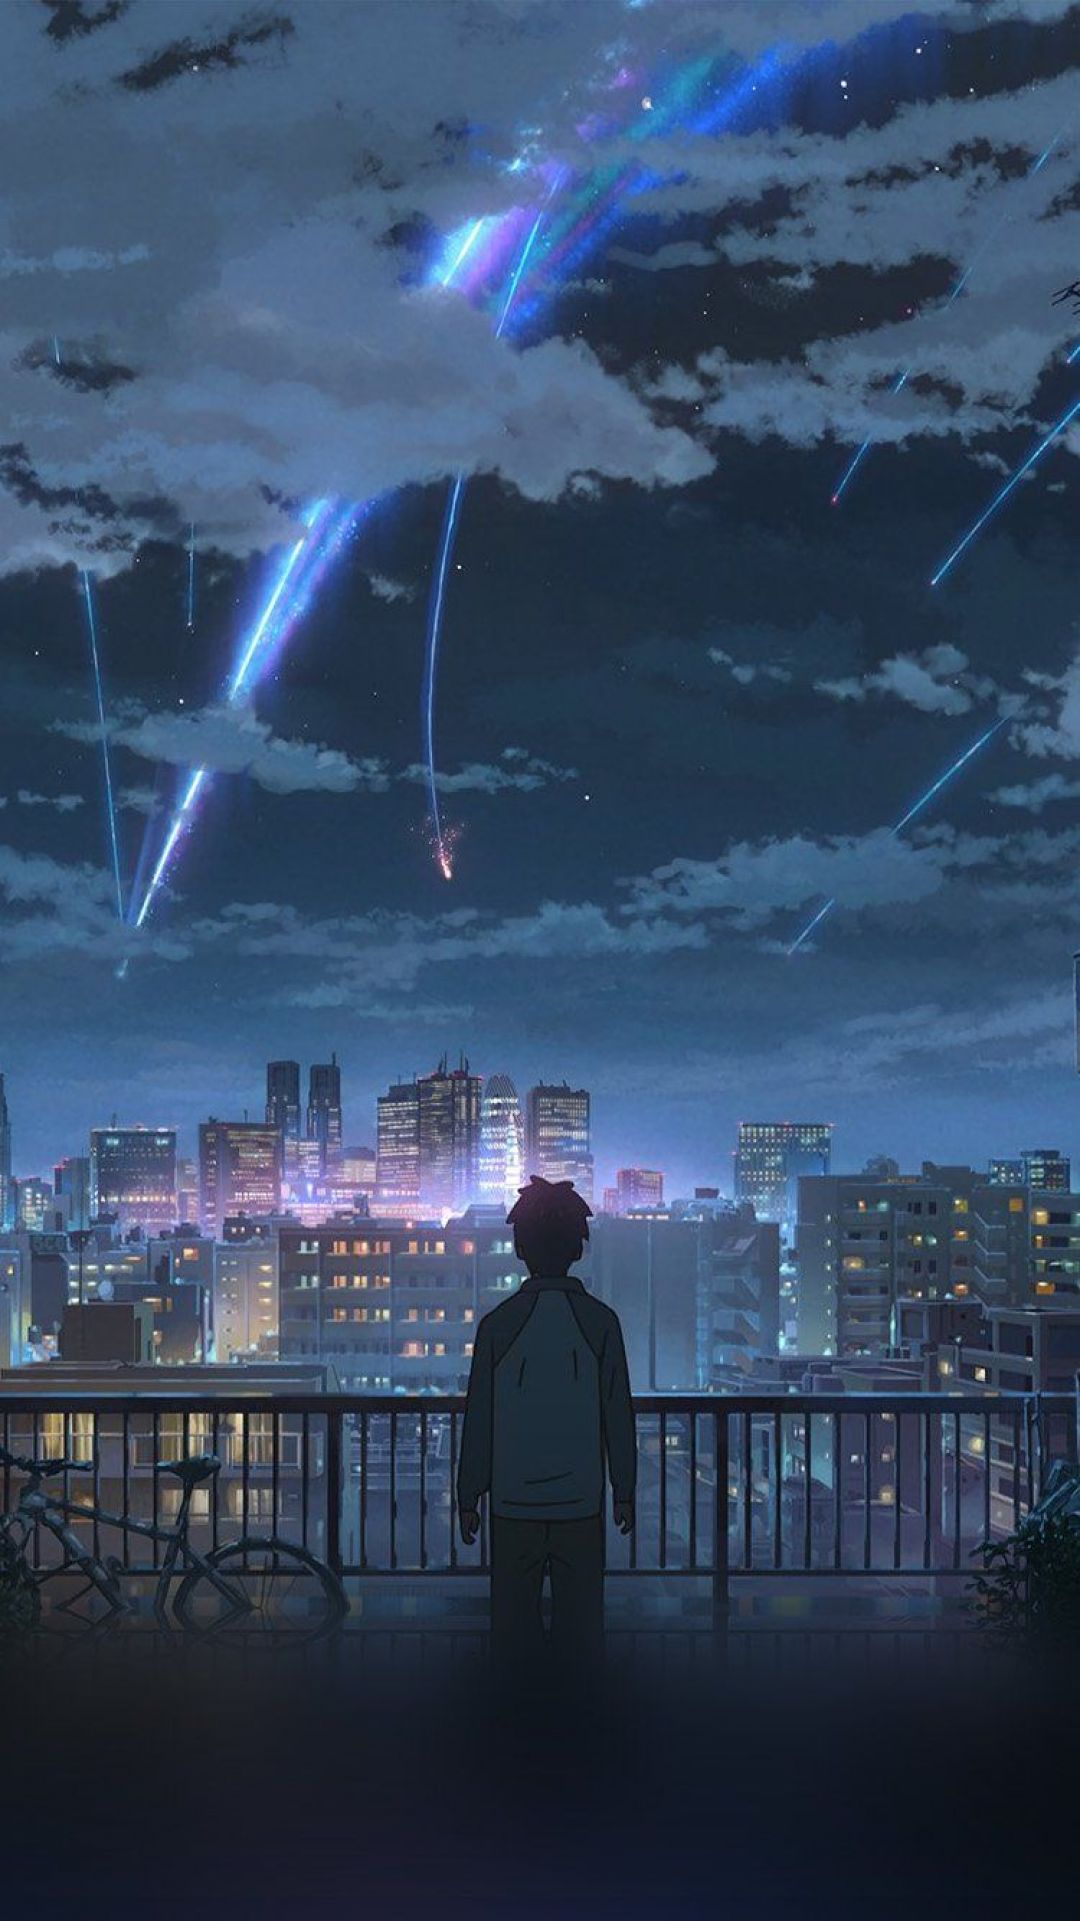 YOURNAME NIGHT ANIME SKY ILLUSTRATION ART WALLPAPER HD IPHONE. Your (2021)